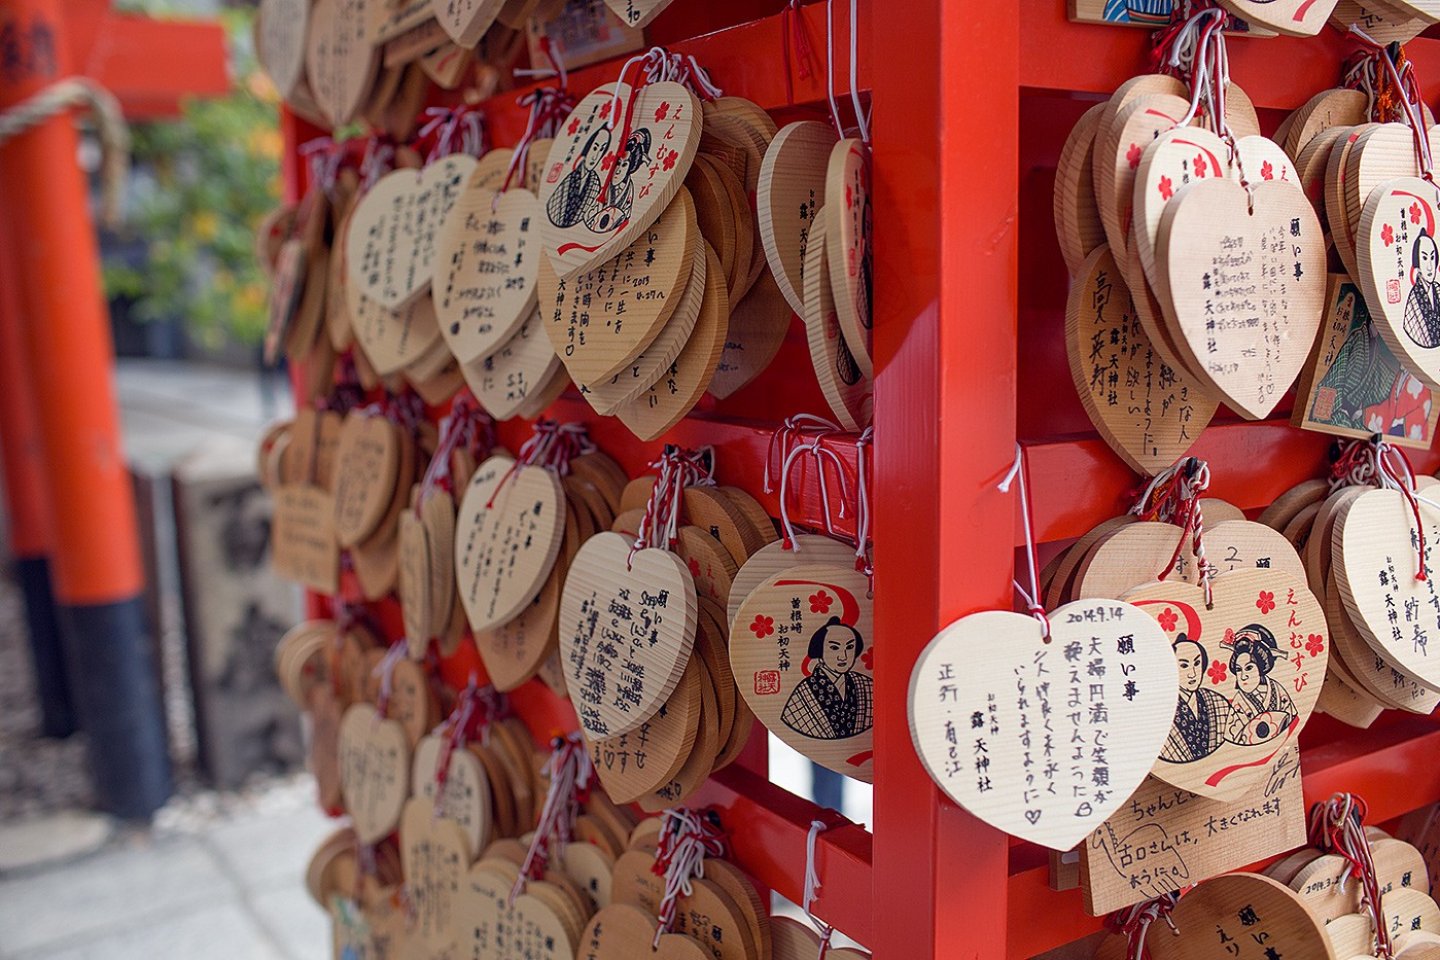 These heart-shaped 'ema' (wooden boards where wishes are written), depict Ohatsu and Tokubei and hang in memory of their story